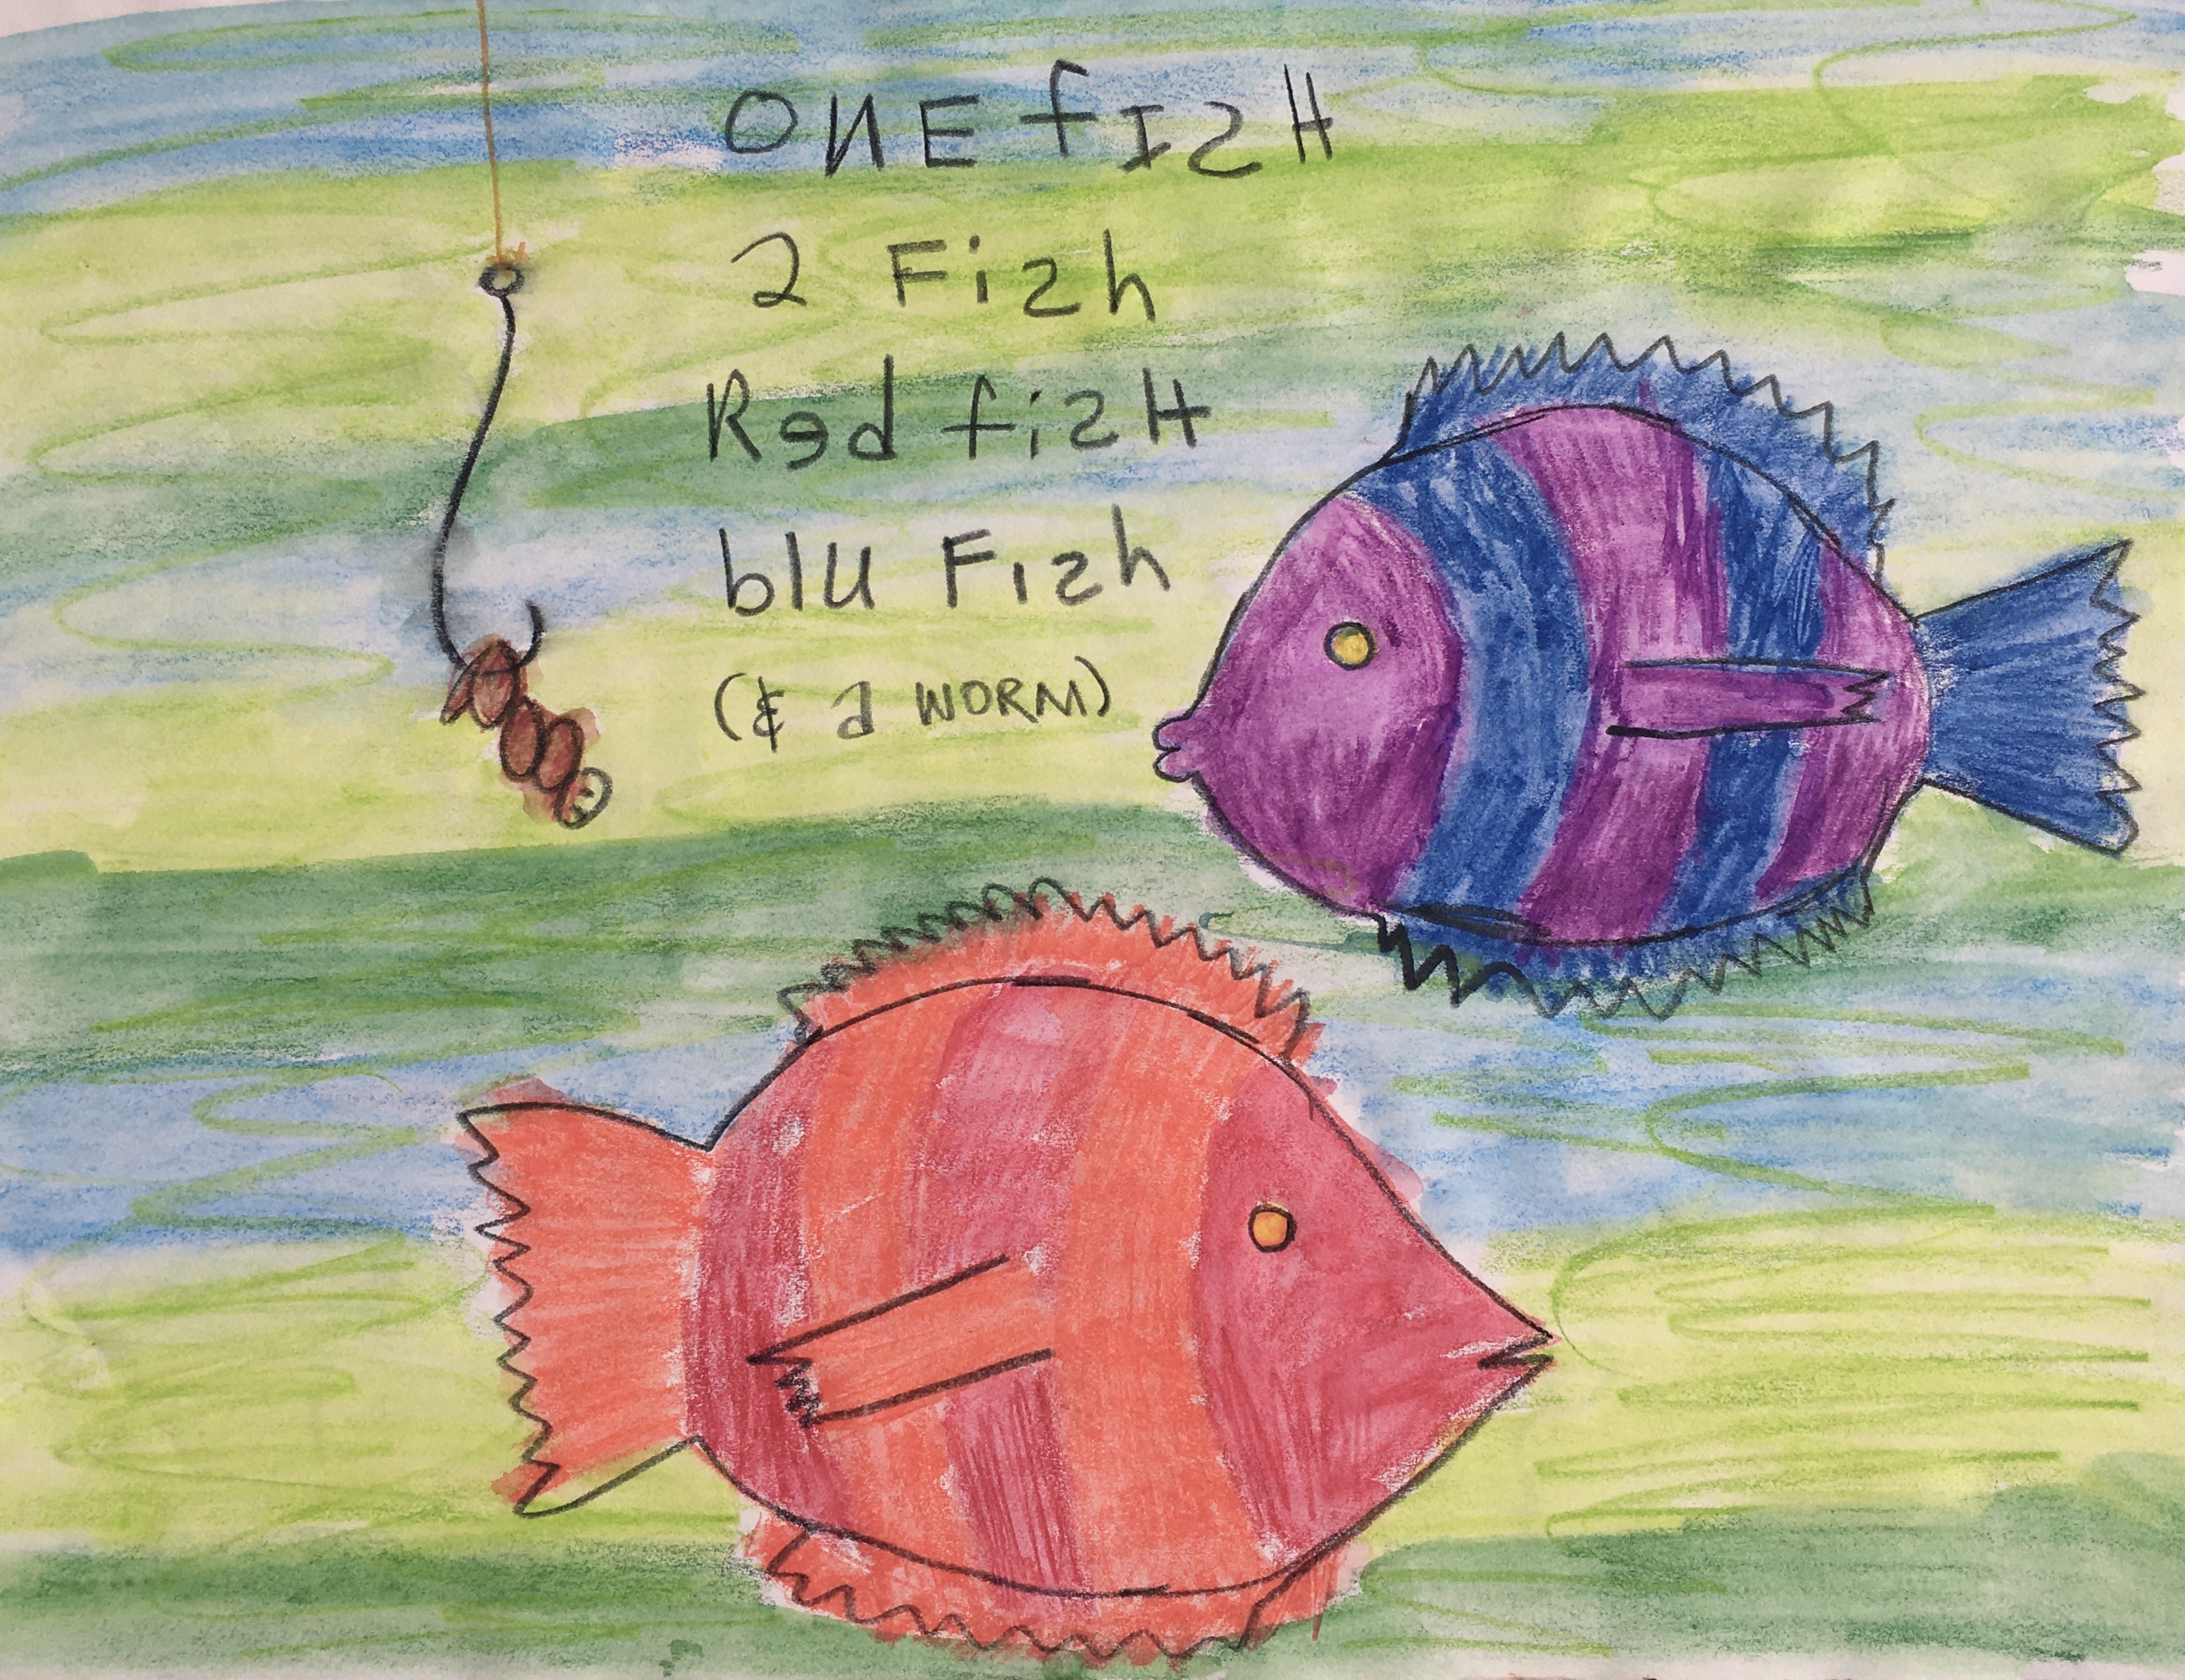 One Fish 2 Fish Red fish blu Fish (& a Worm), 1994
Colored Markers on Paper, Walli White, artist